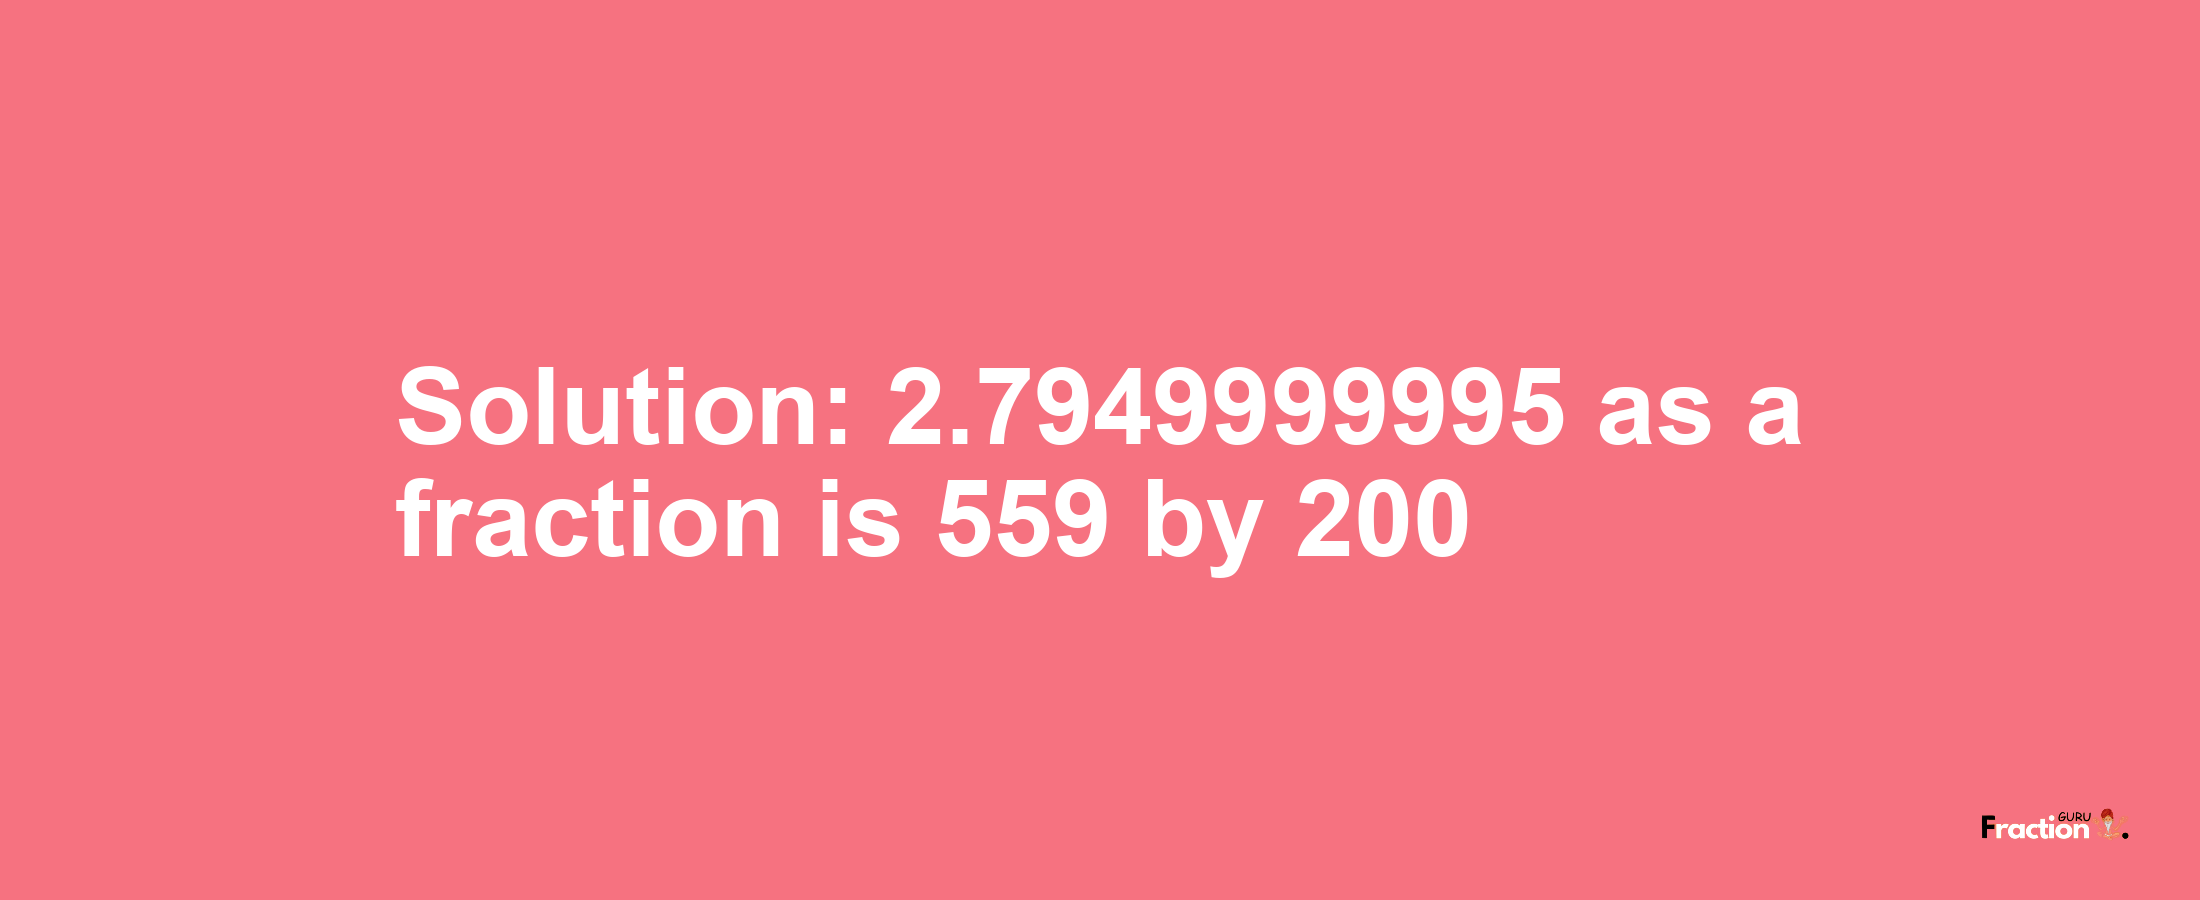 Solution:2.7949999995 as a fraction is 559/200